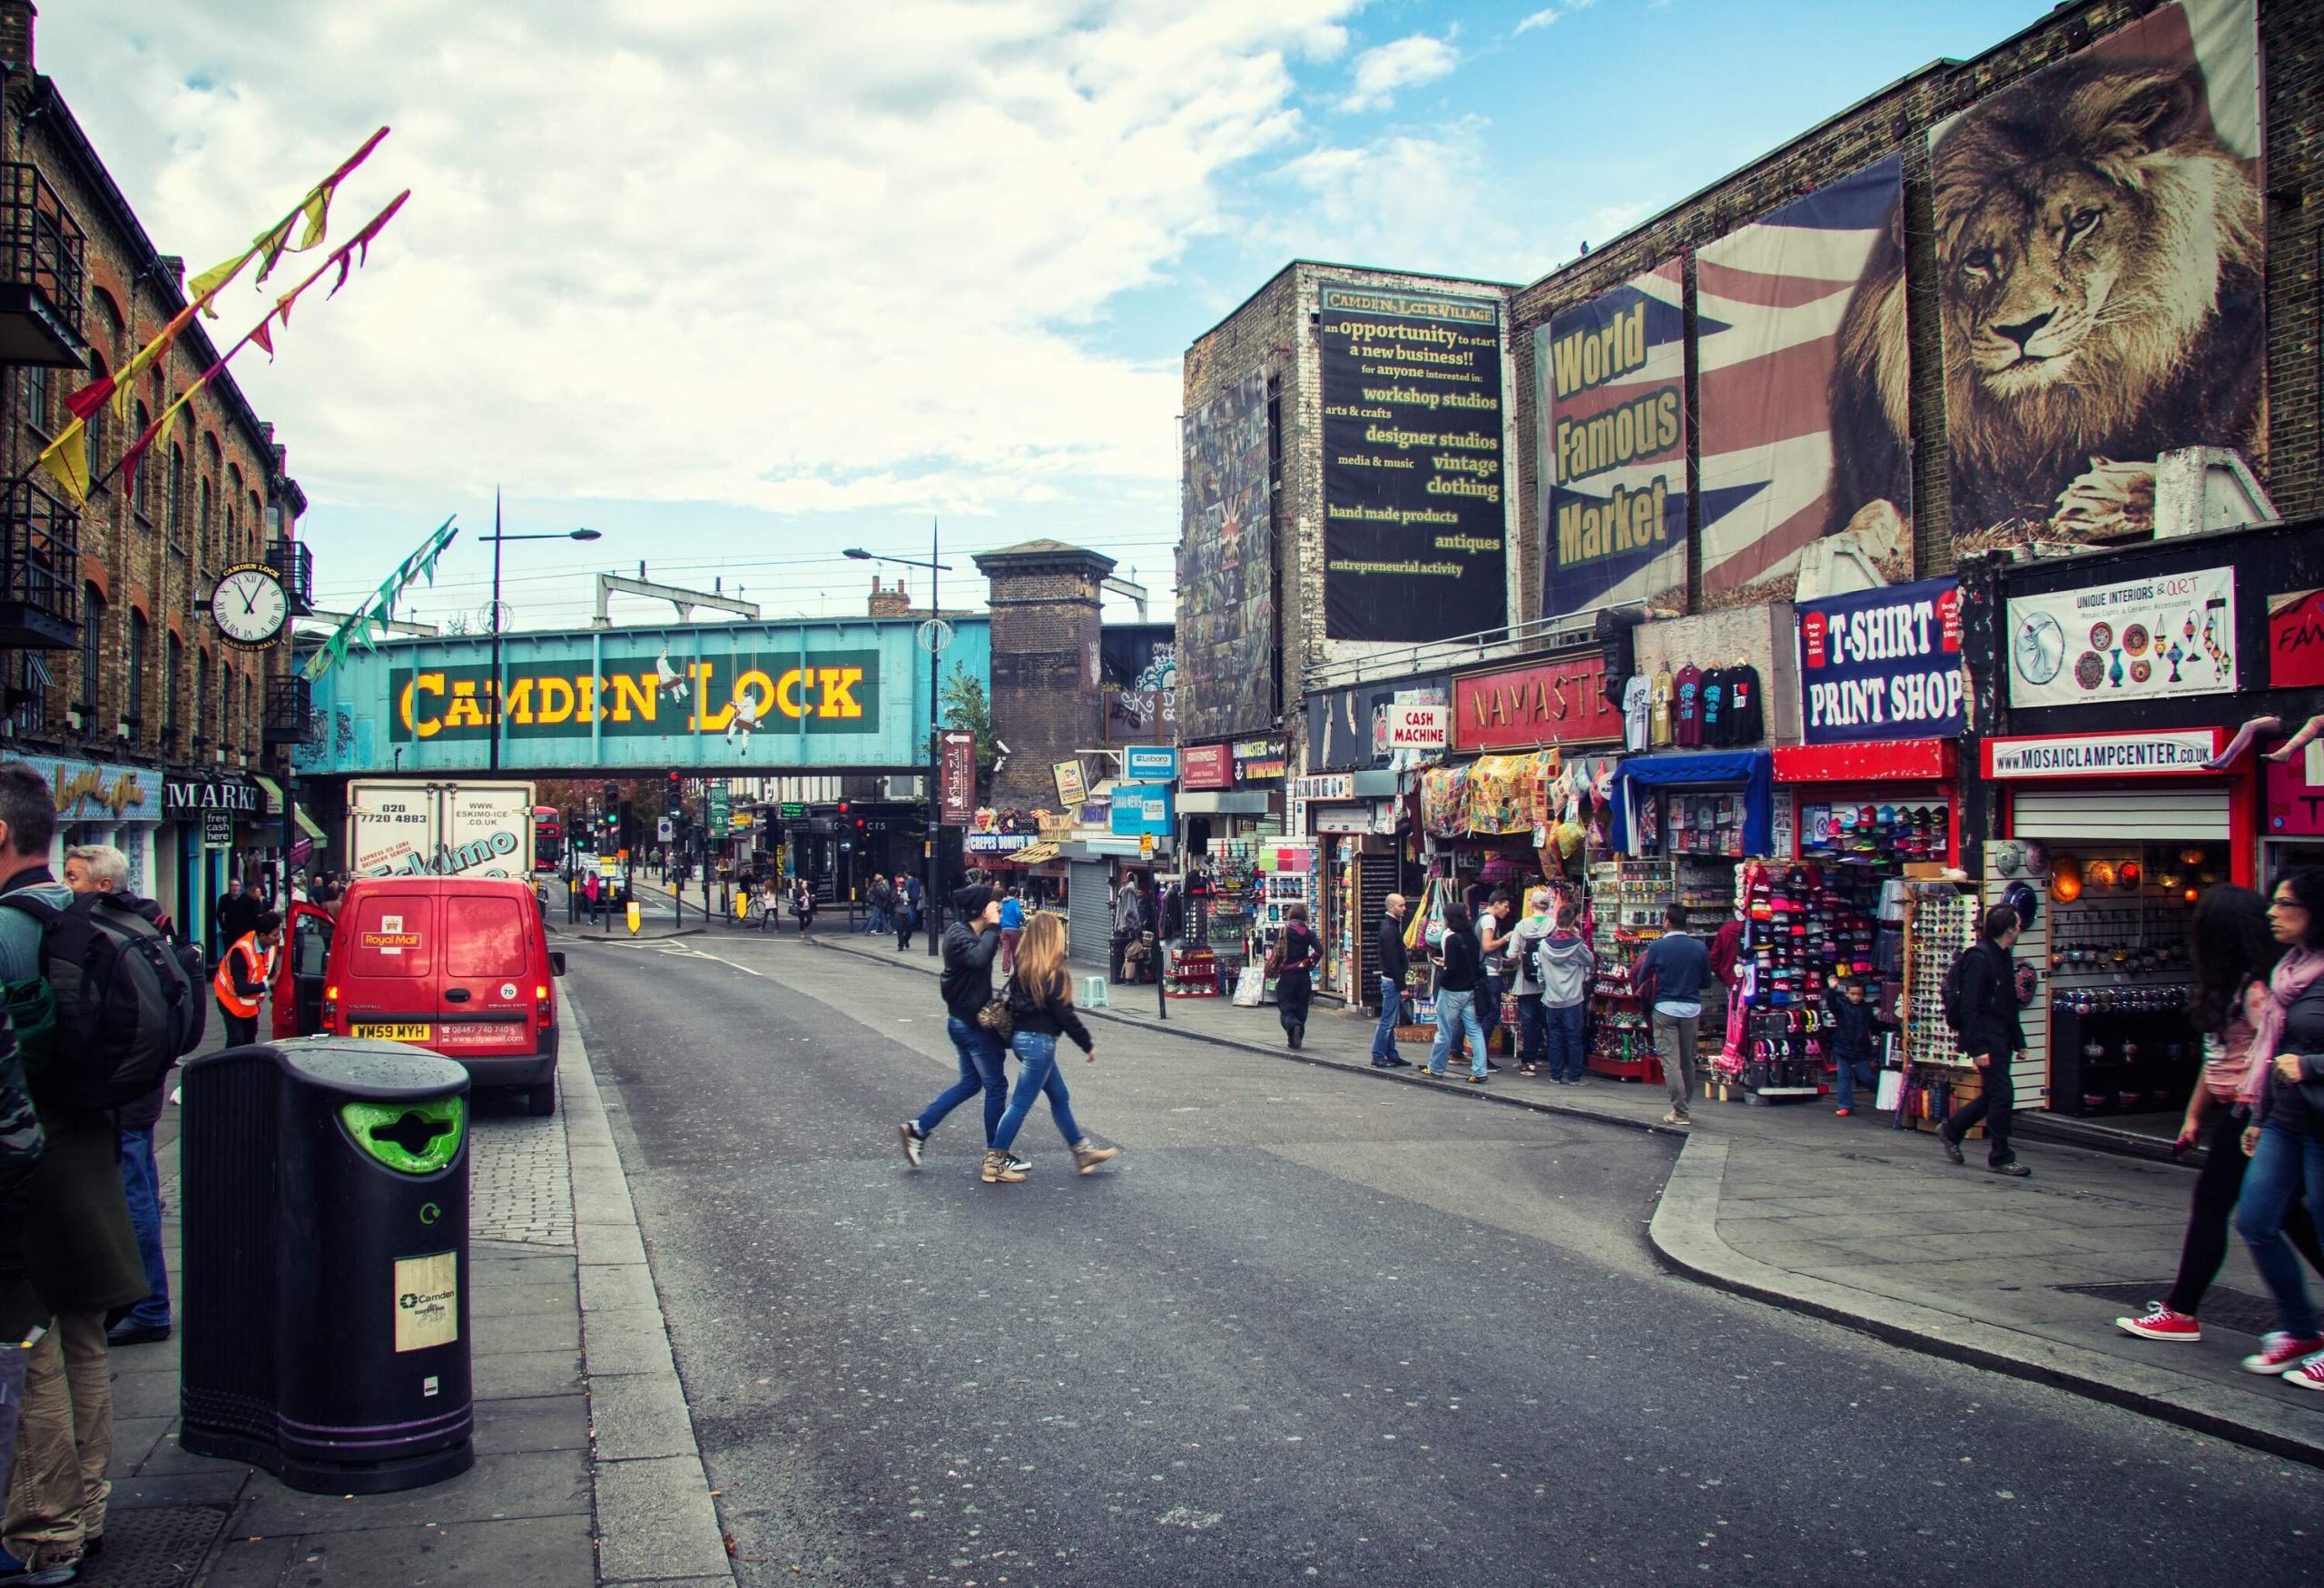 People strolling through the Camden High Street with colourful shop signs and banners.